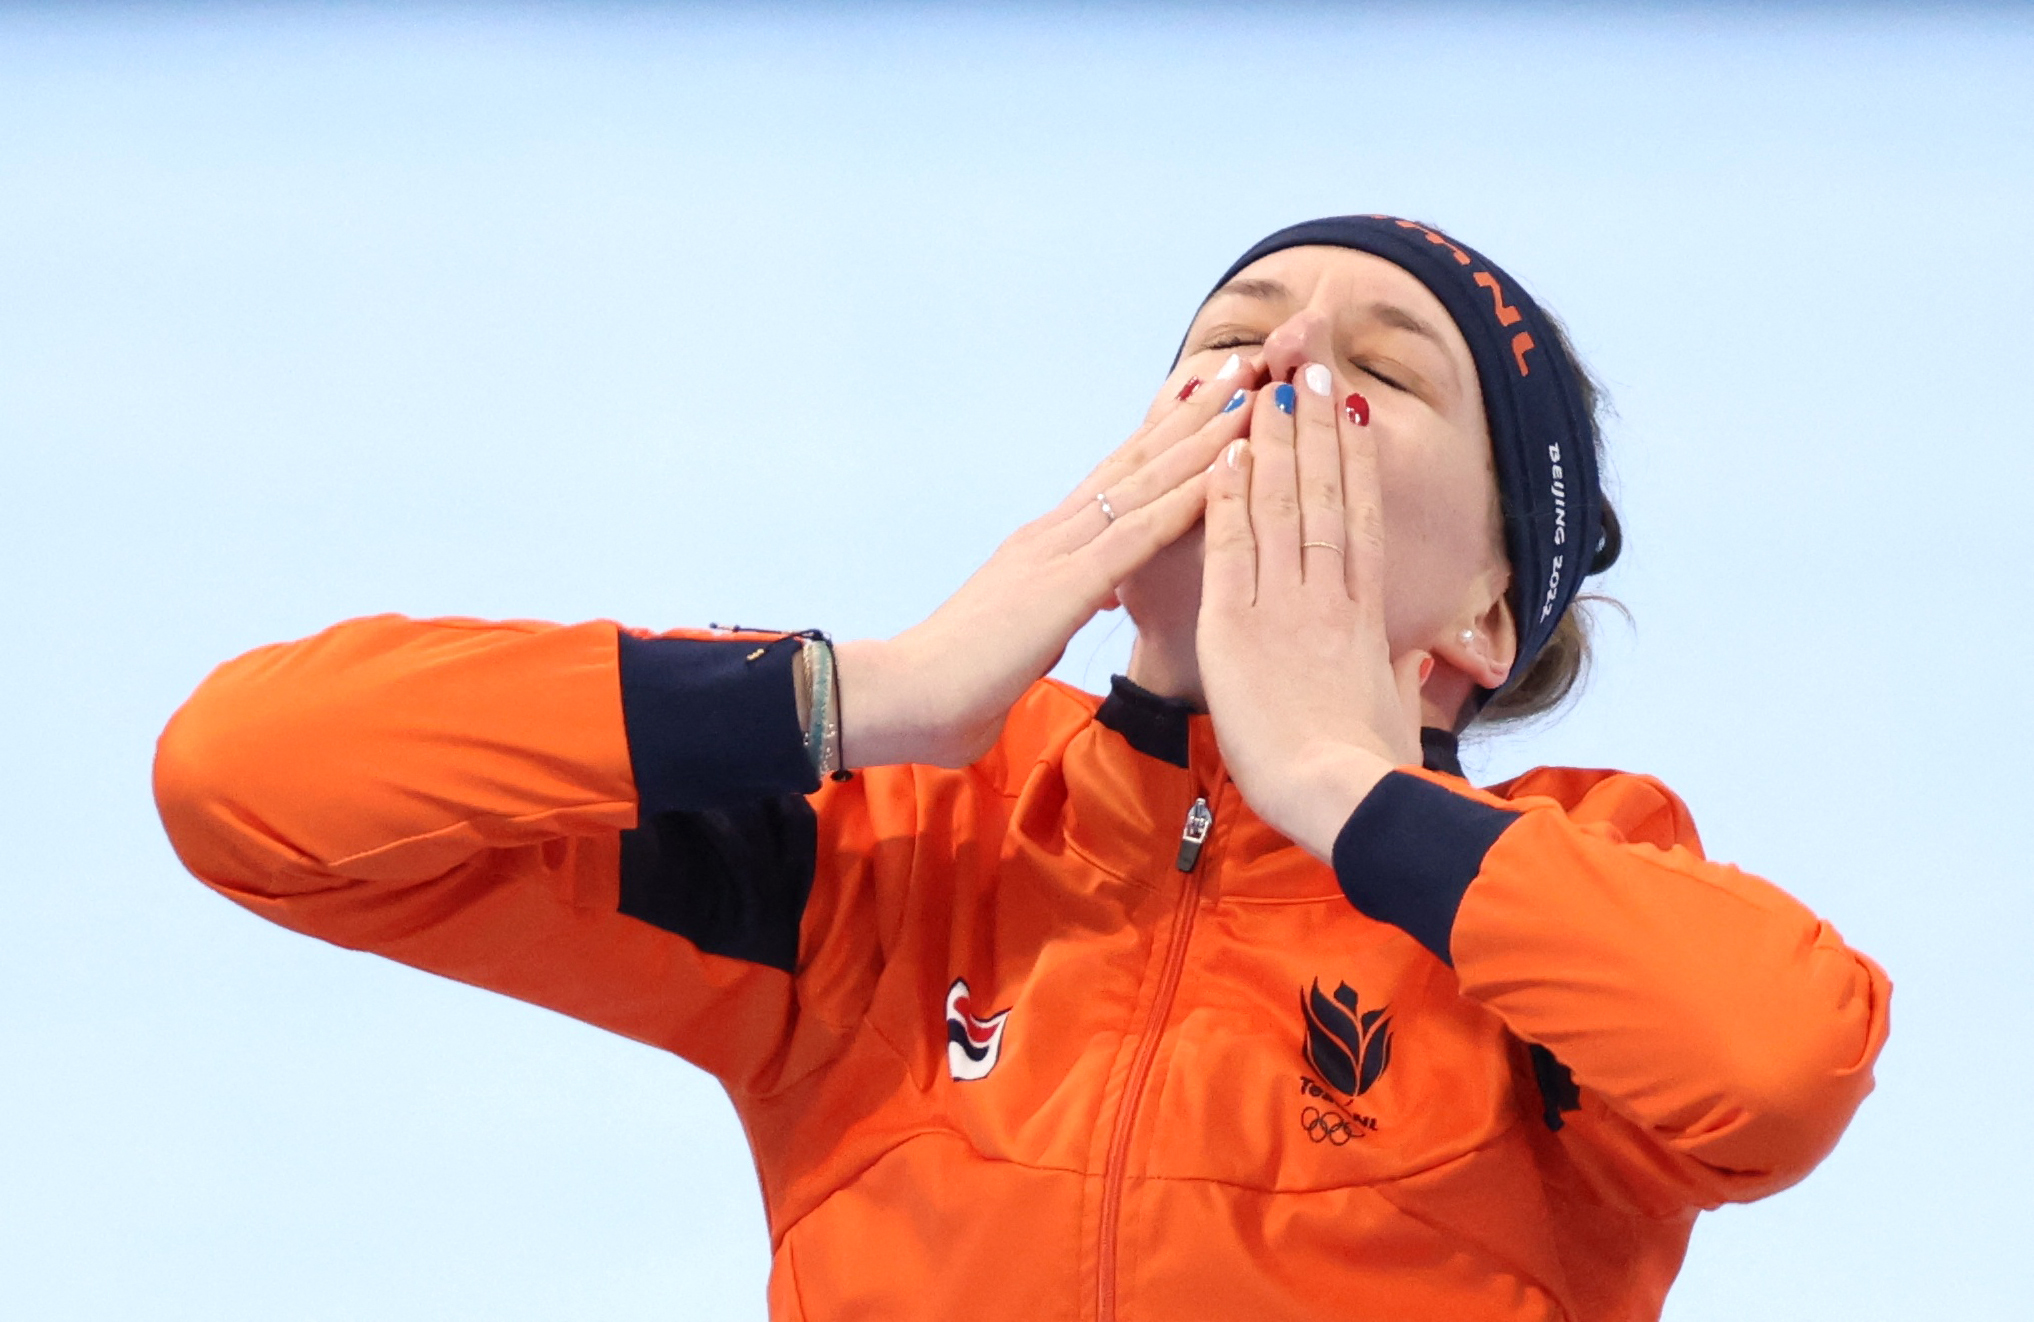 2022 Beijing Olympics - Speed Skating - Women's 1500m - National Speed Skating Oval, Beijing, China - February 7, 2022. Gold medalist Ireen Wust of the Netherlands reacts on the podium during the flower ceremony. REUTERS/Evelyn Hockstein